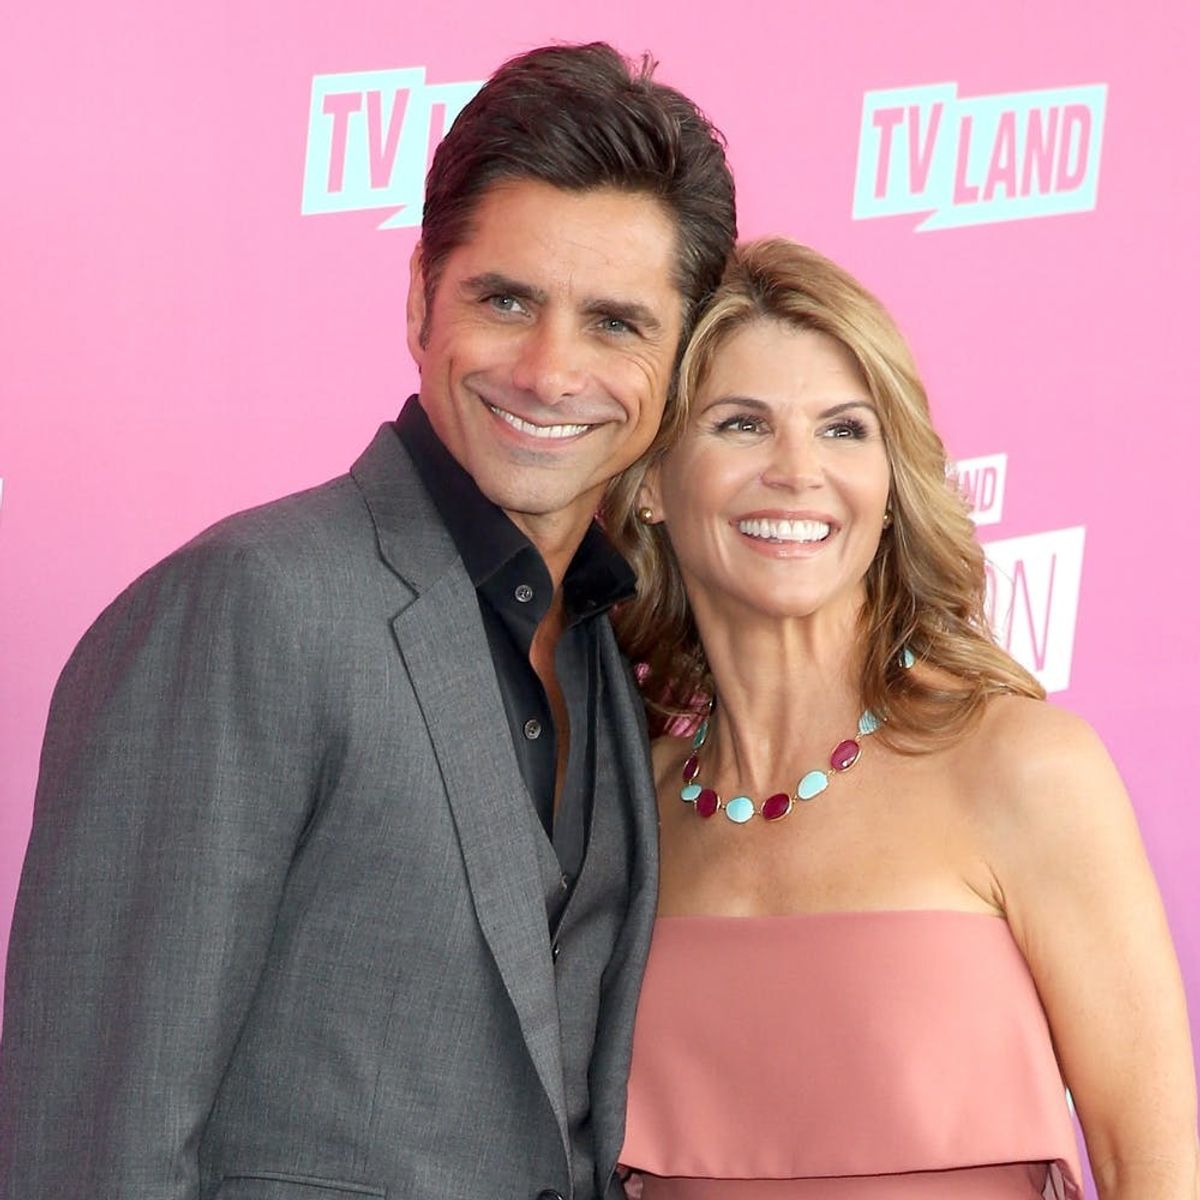 John Stamos Introduced His Son to His ‘Full House’ Family and Our Hearts Just Grew 3 Sizes